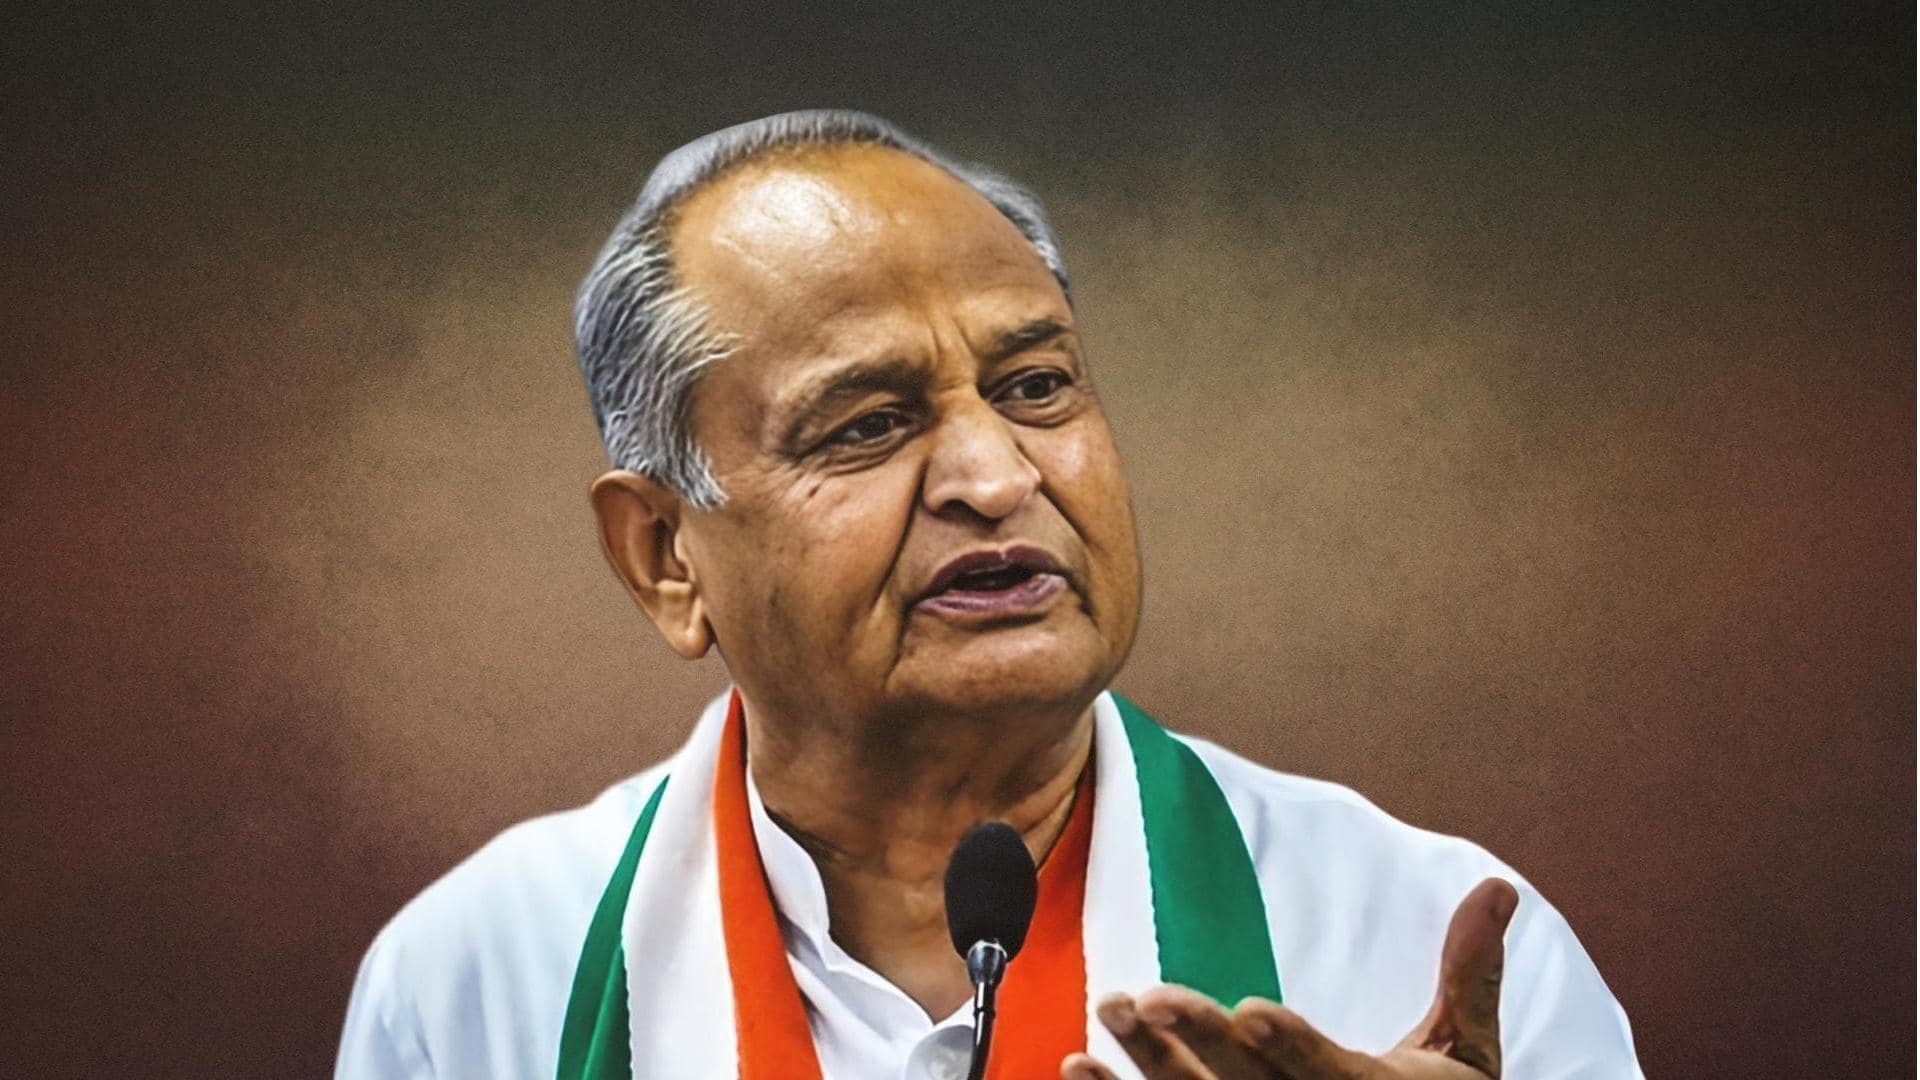 Gehlot jibes at BJP amid delay over Rajasthan CM's appointment